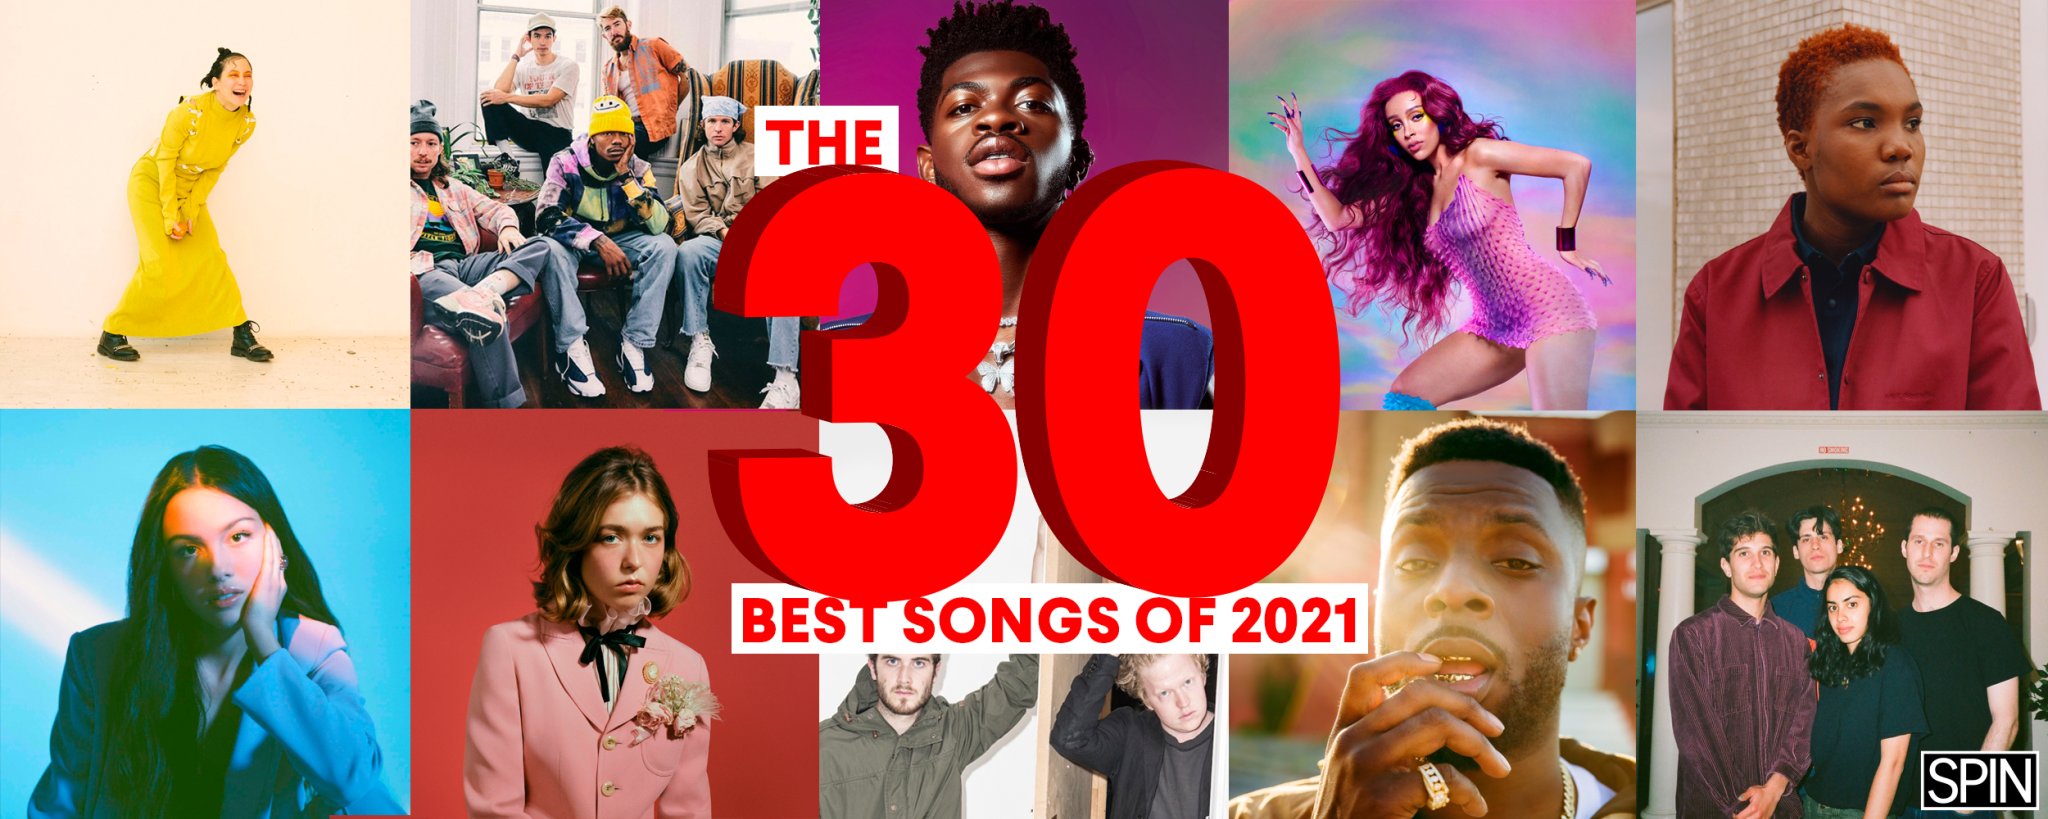 The 30 Best Songs of 2021